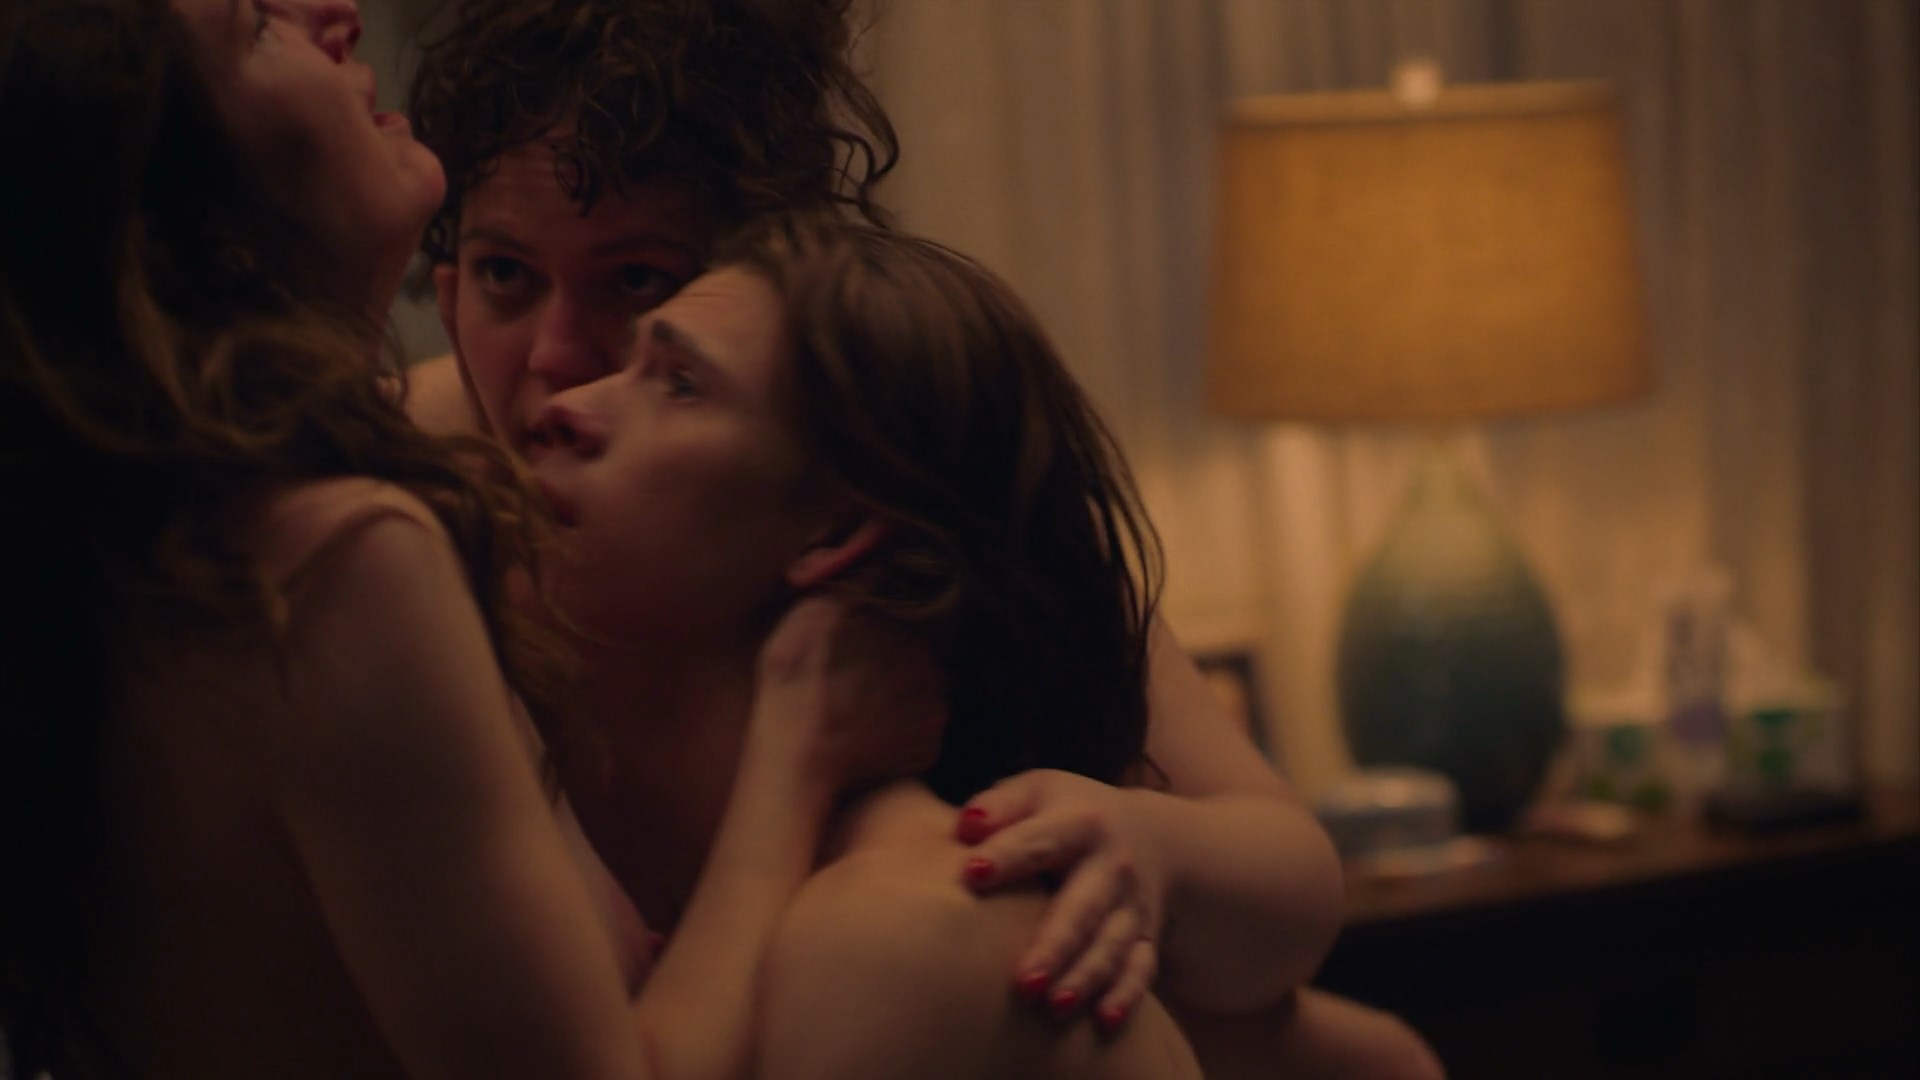 Kathryn Hahn and Katie Kershaw are having threesome with some guy. 